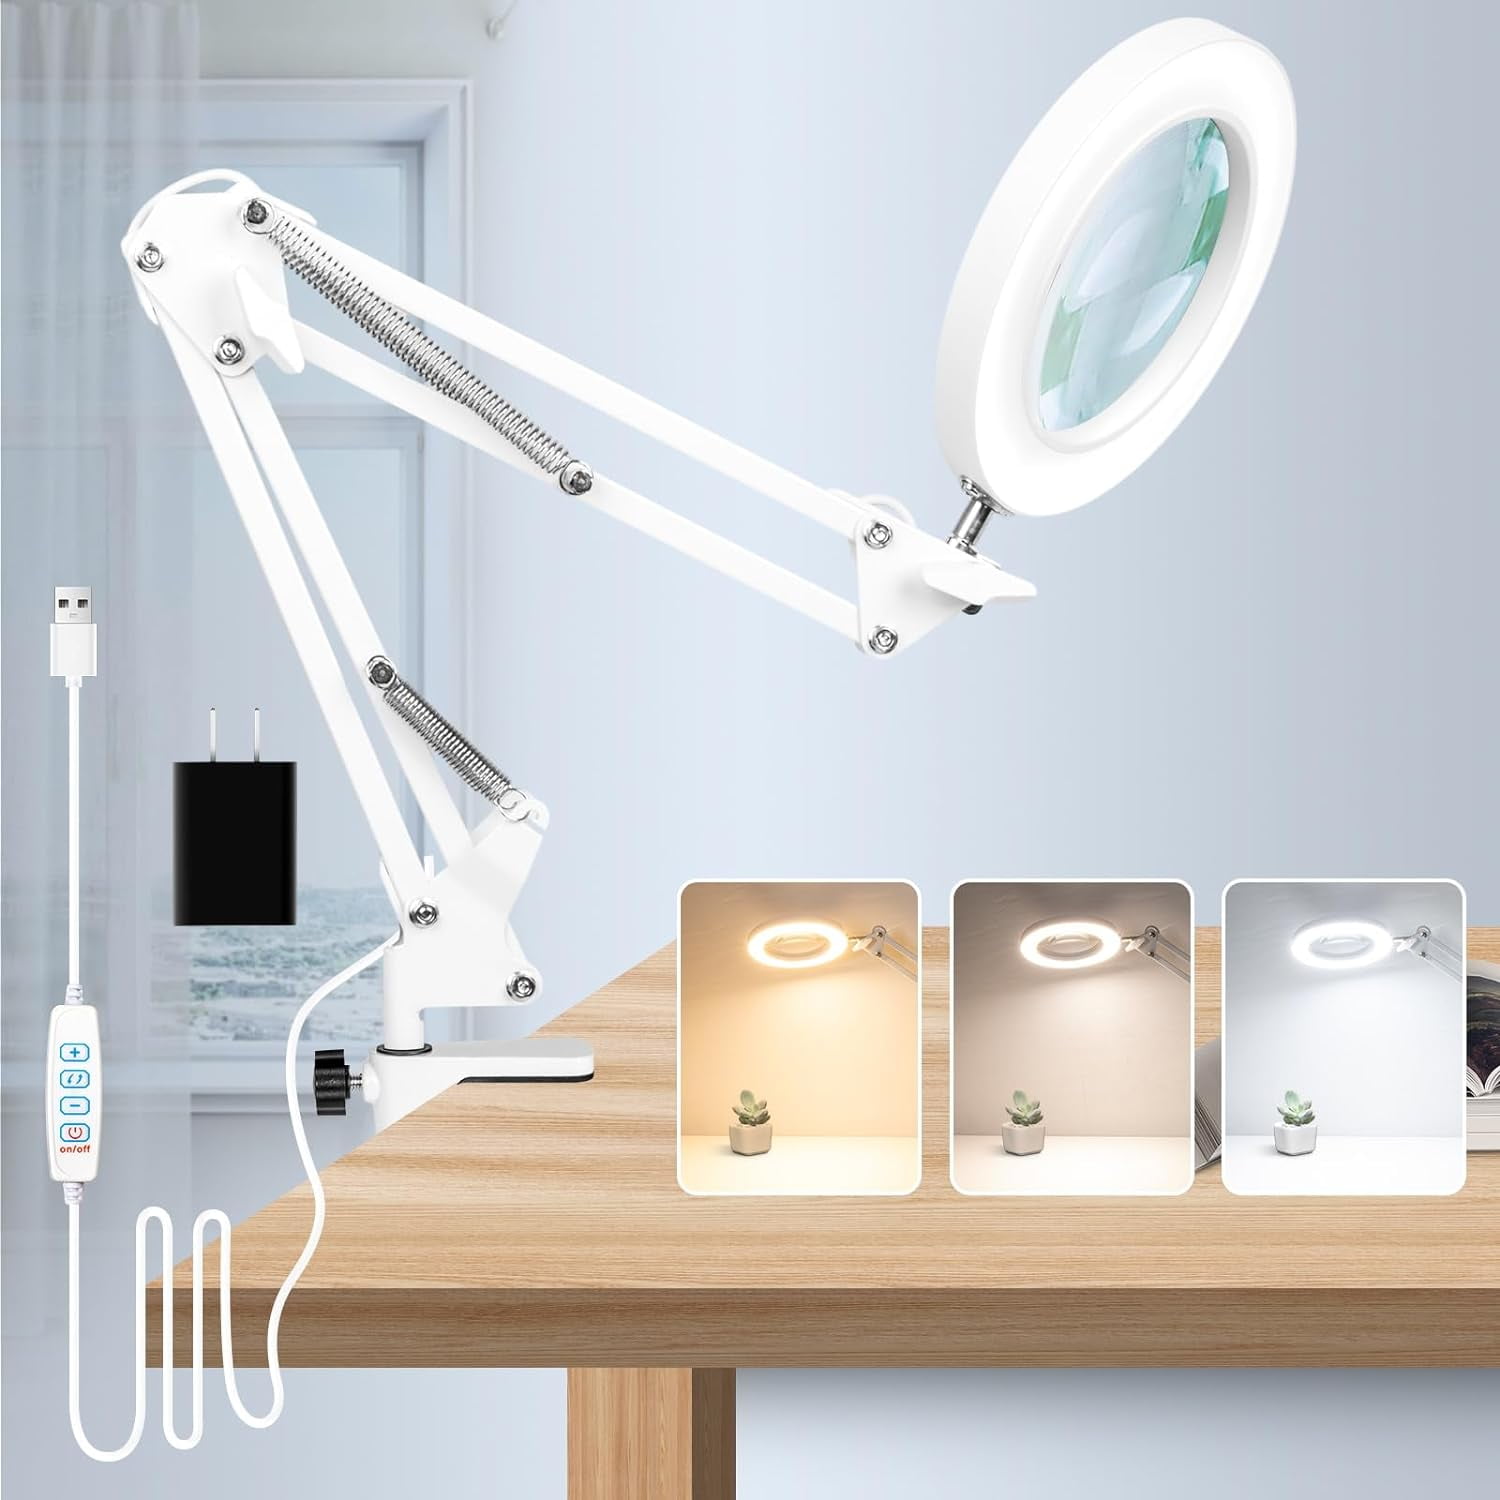 B&S Magnifying Lamp with Adjustable Metal Arm